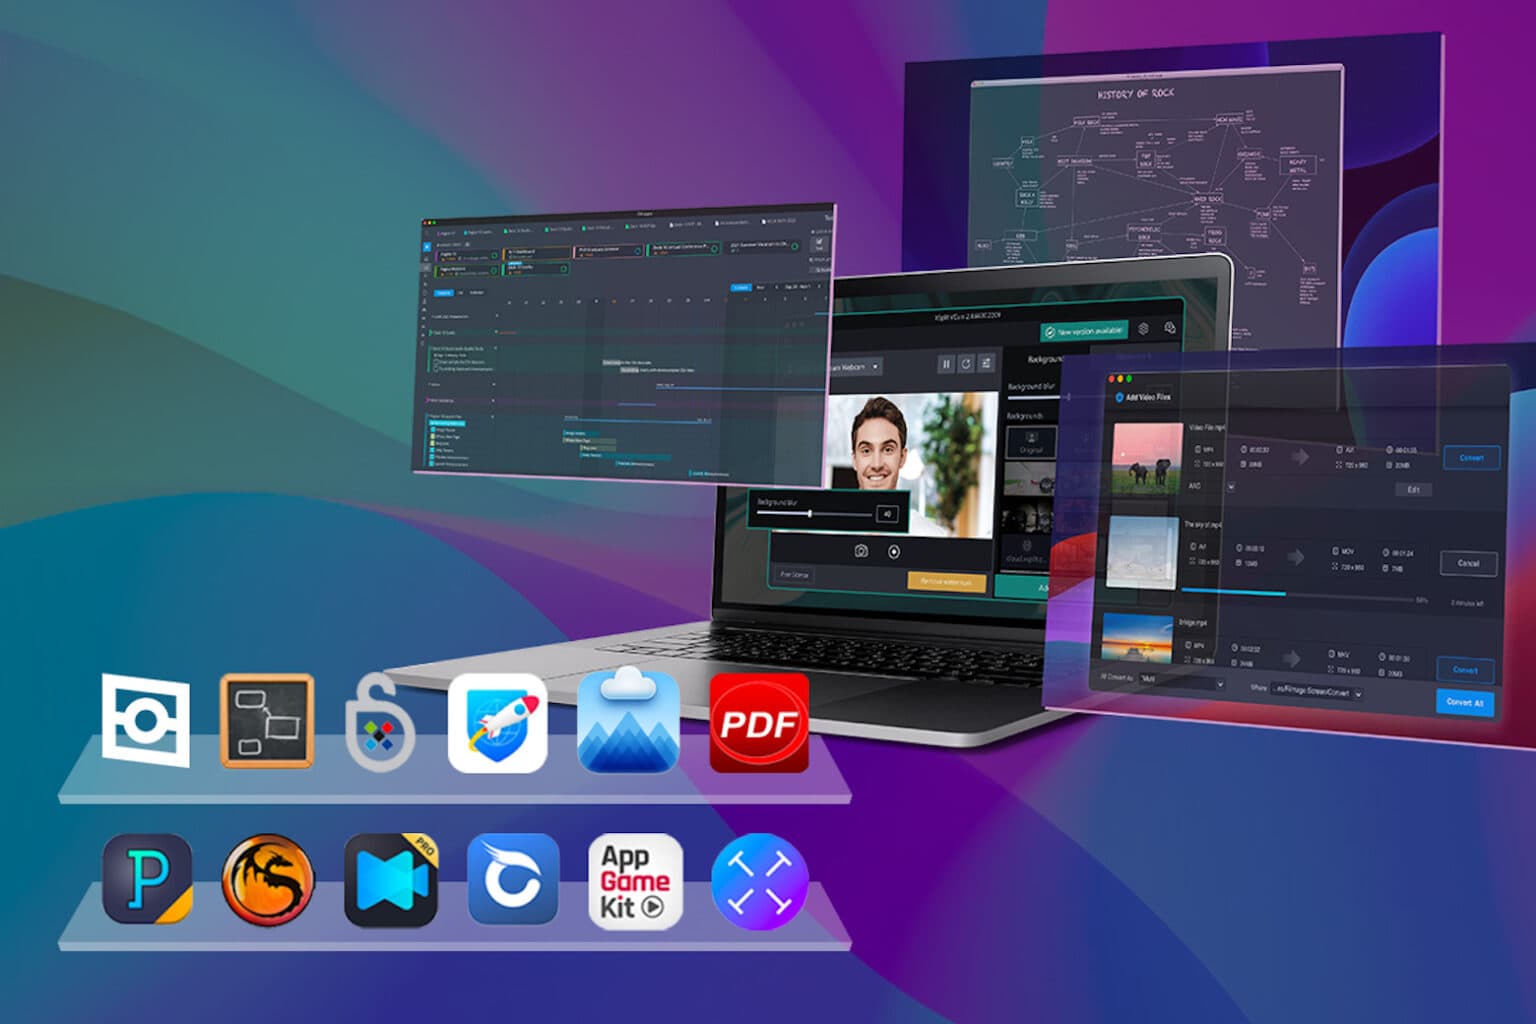 Boost your Mac's productivity with 12 of the world's highest rated apps, less than $18 today.